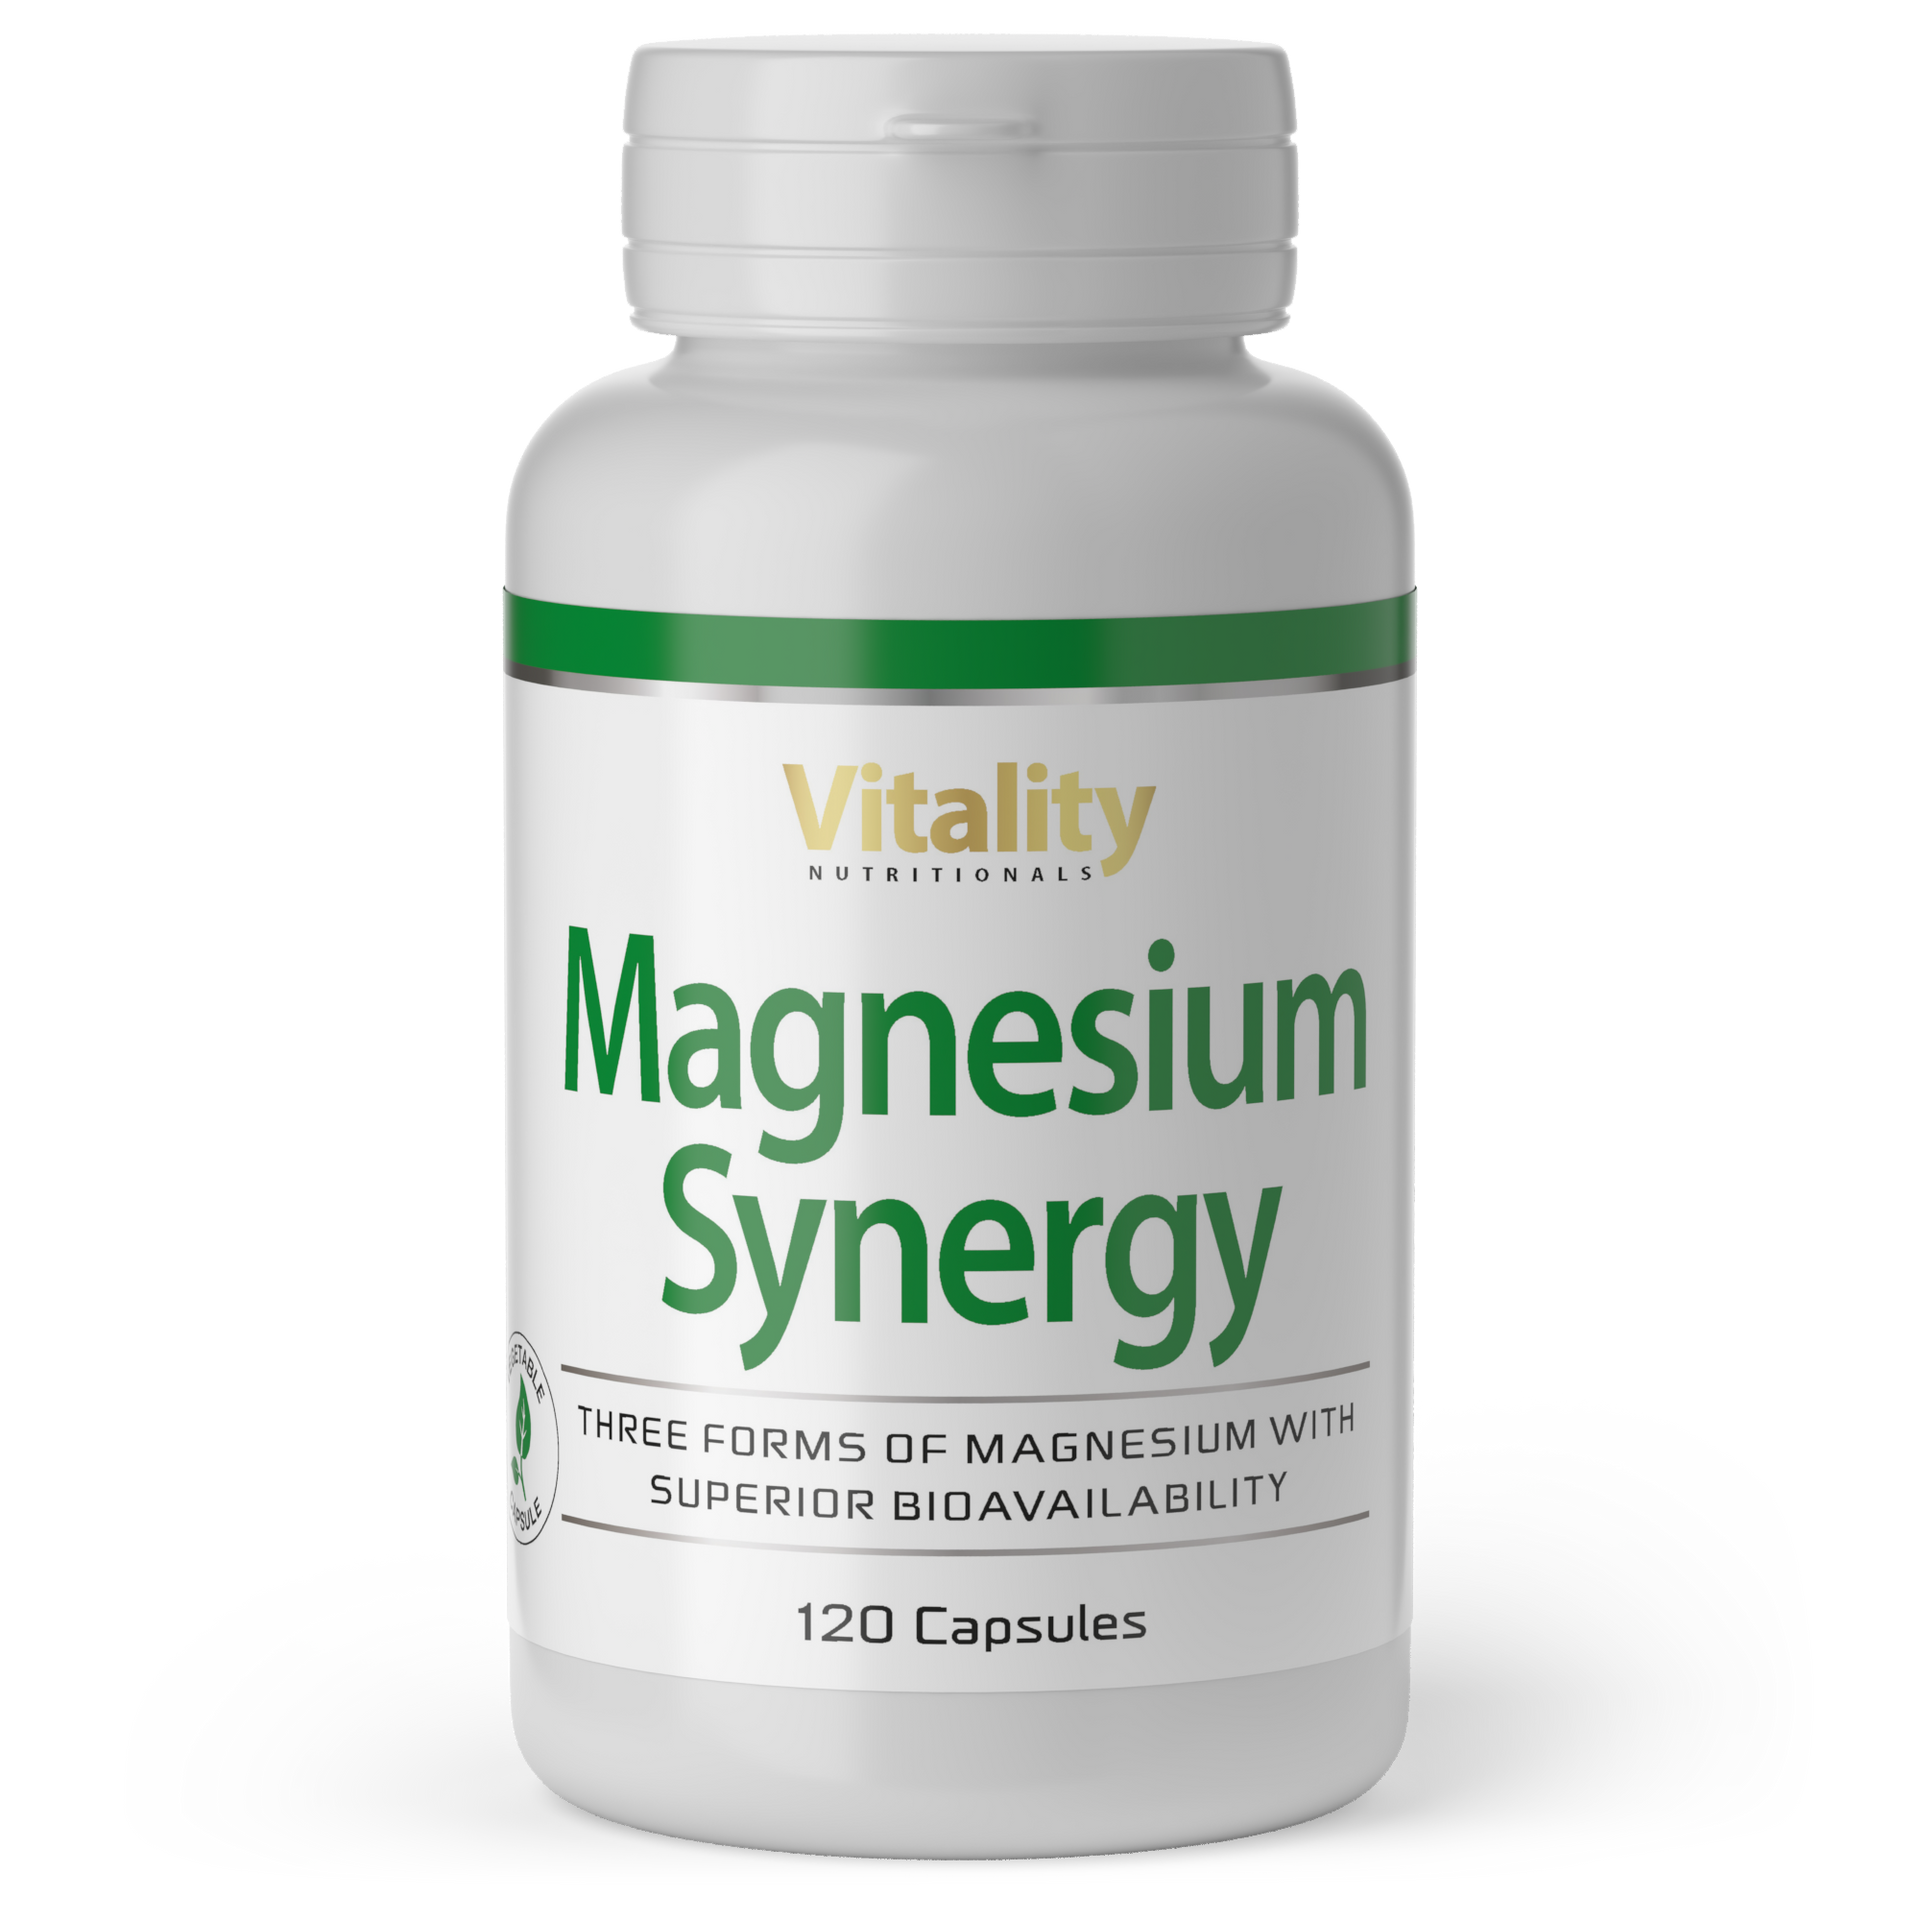 6813-04-Magnesium-Synergy-front-front.png